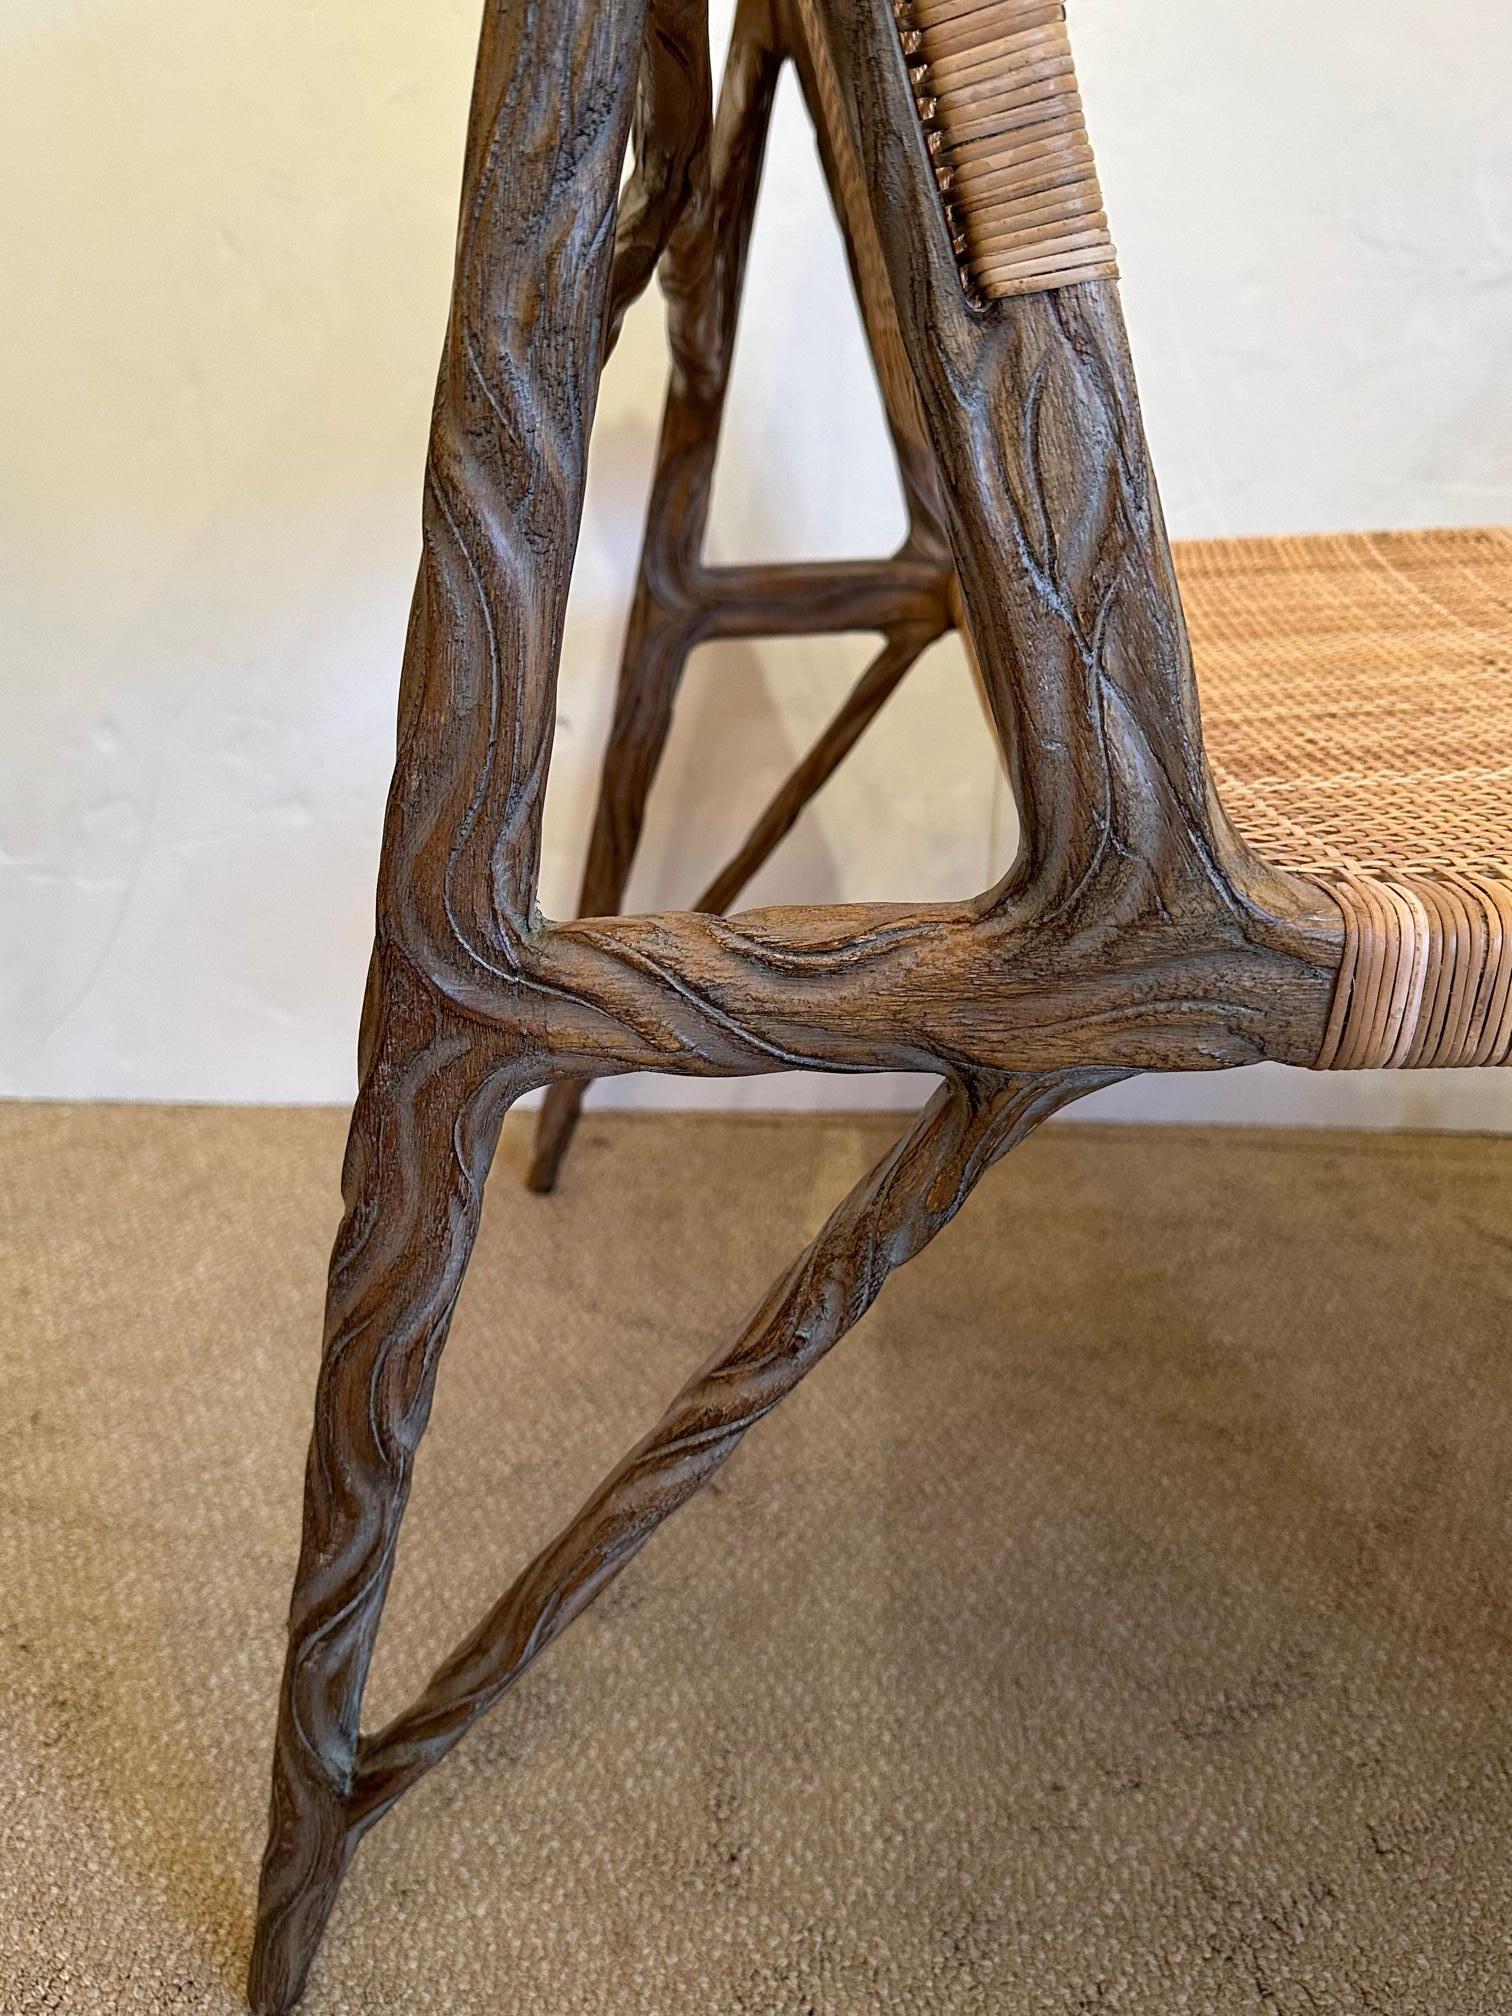 Superb Organic Modern Faux Twig and Woven Rattan Chair For Sale 4